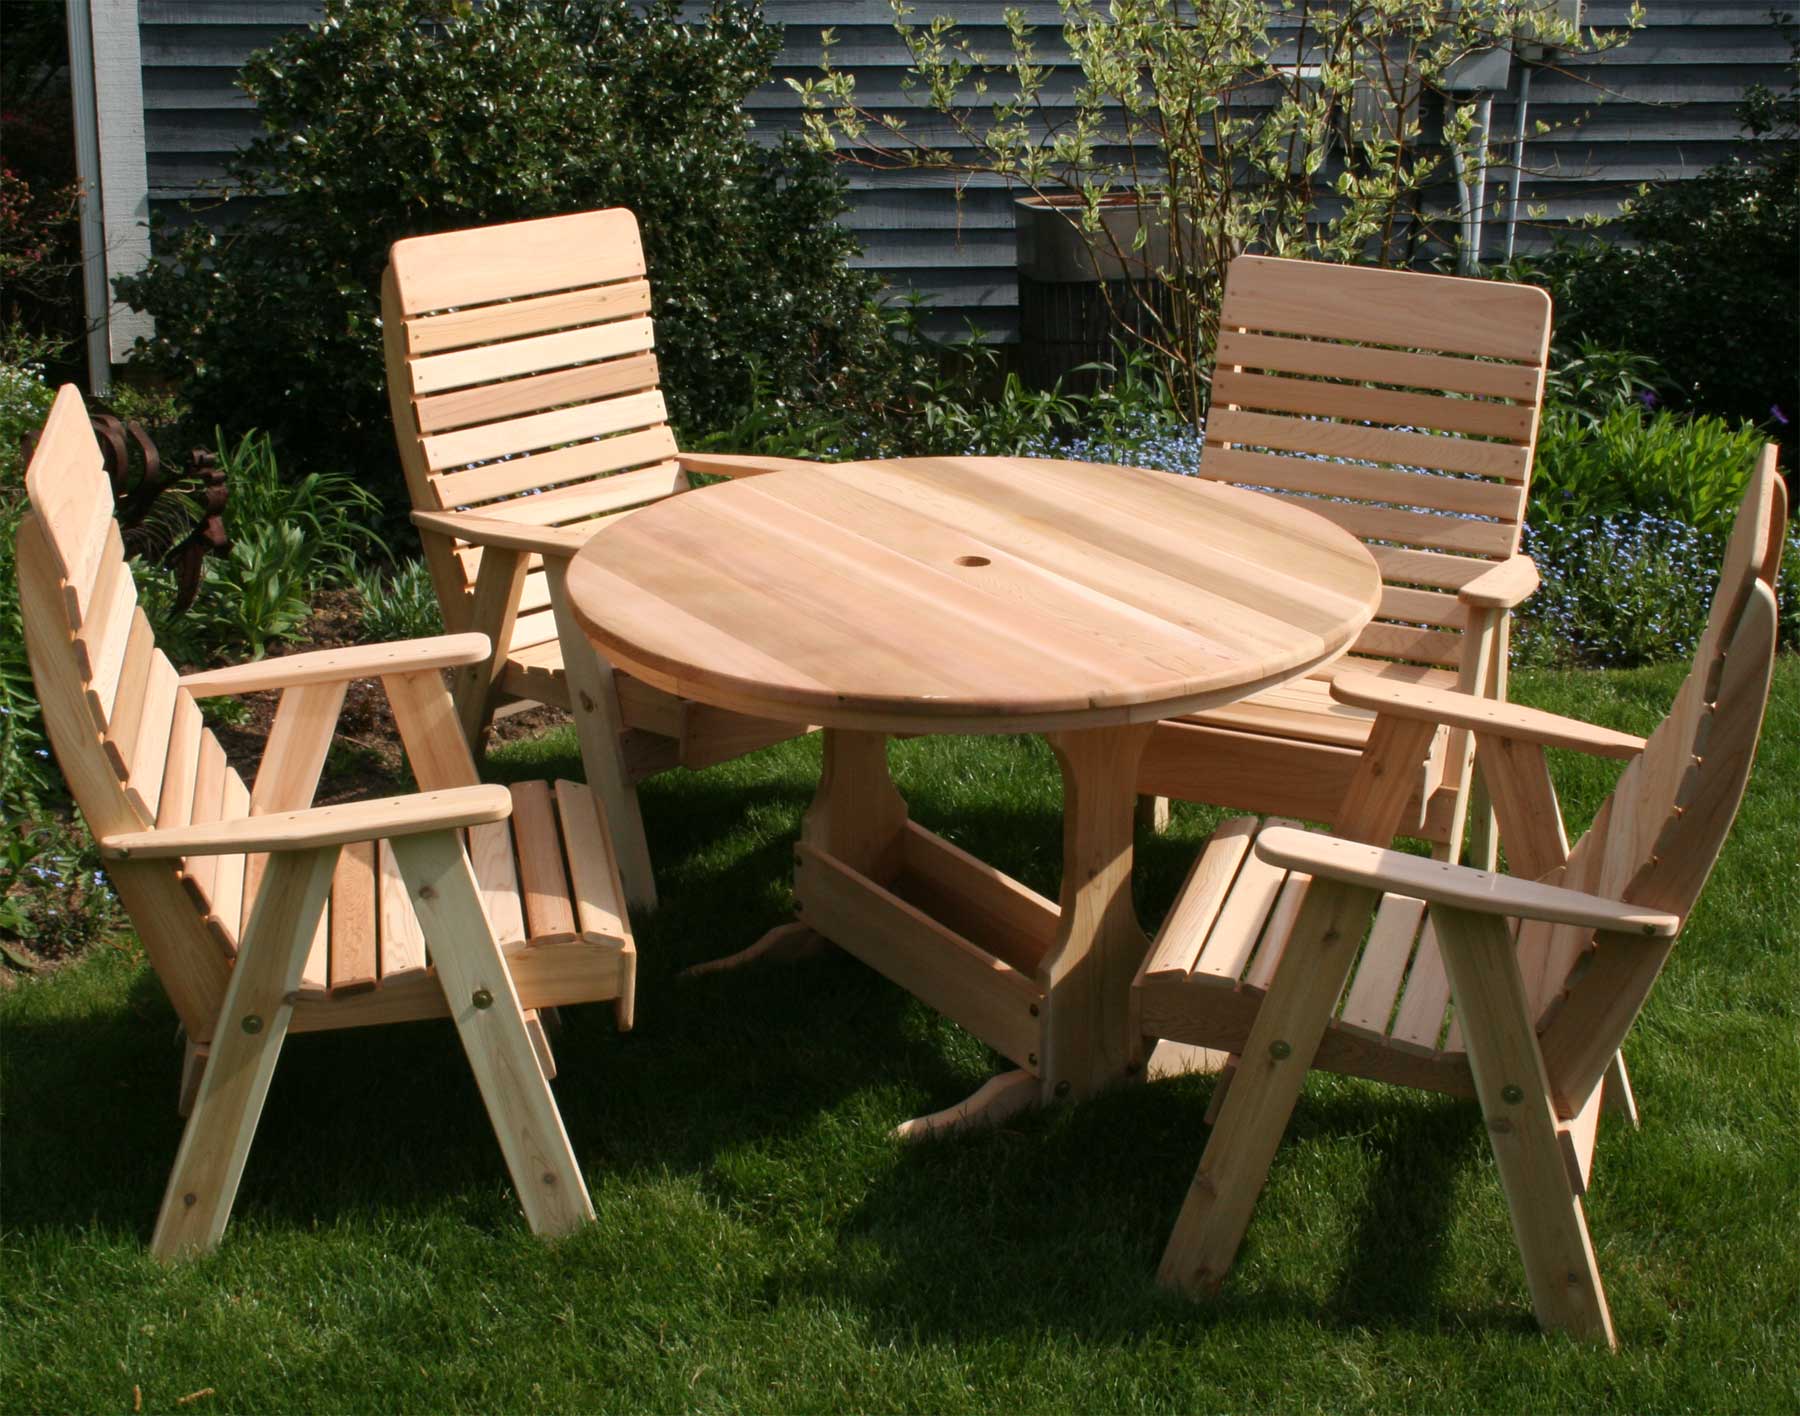 Tips On How To Clean The Garden Furniture In A Perfect Way